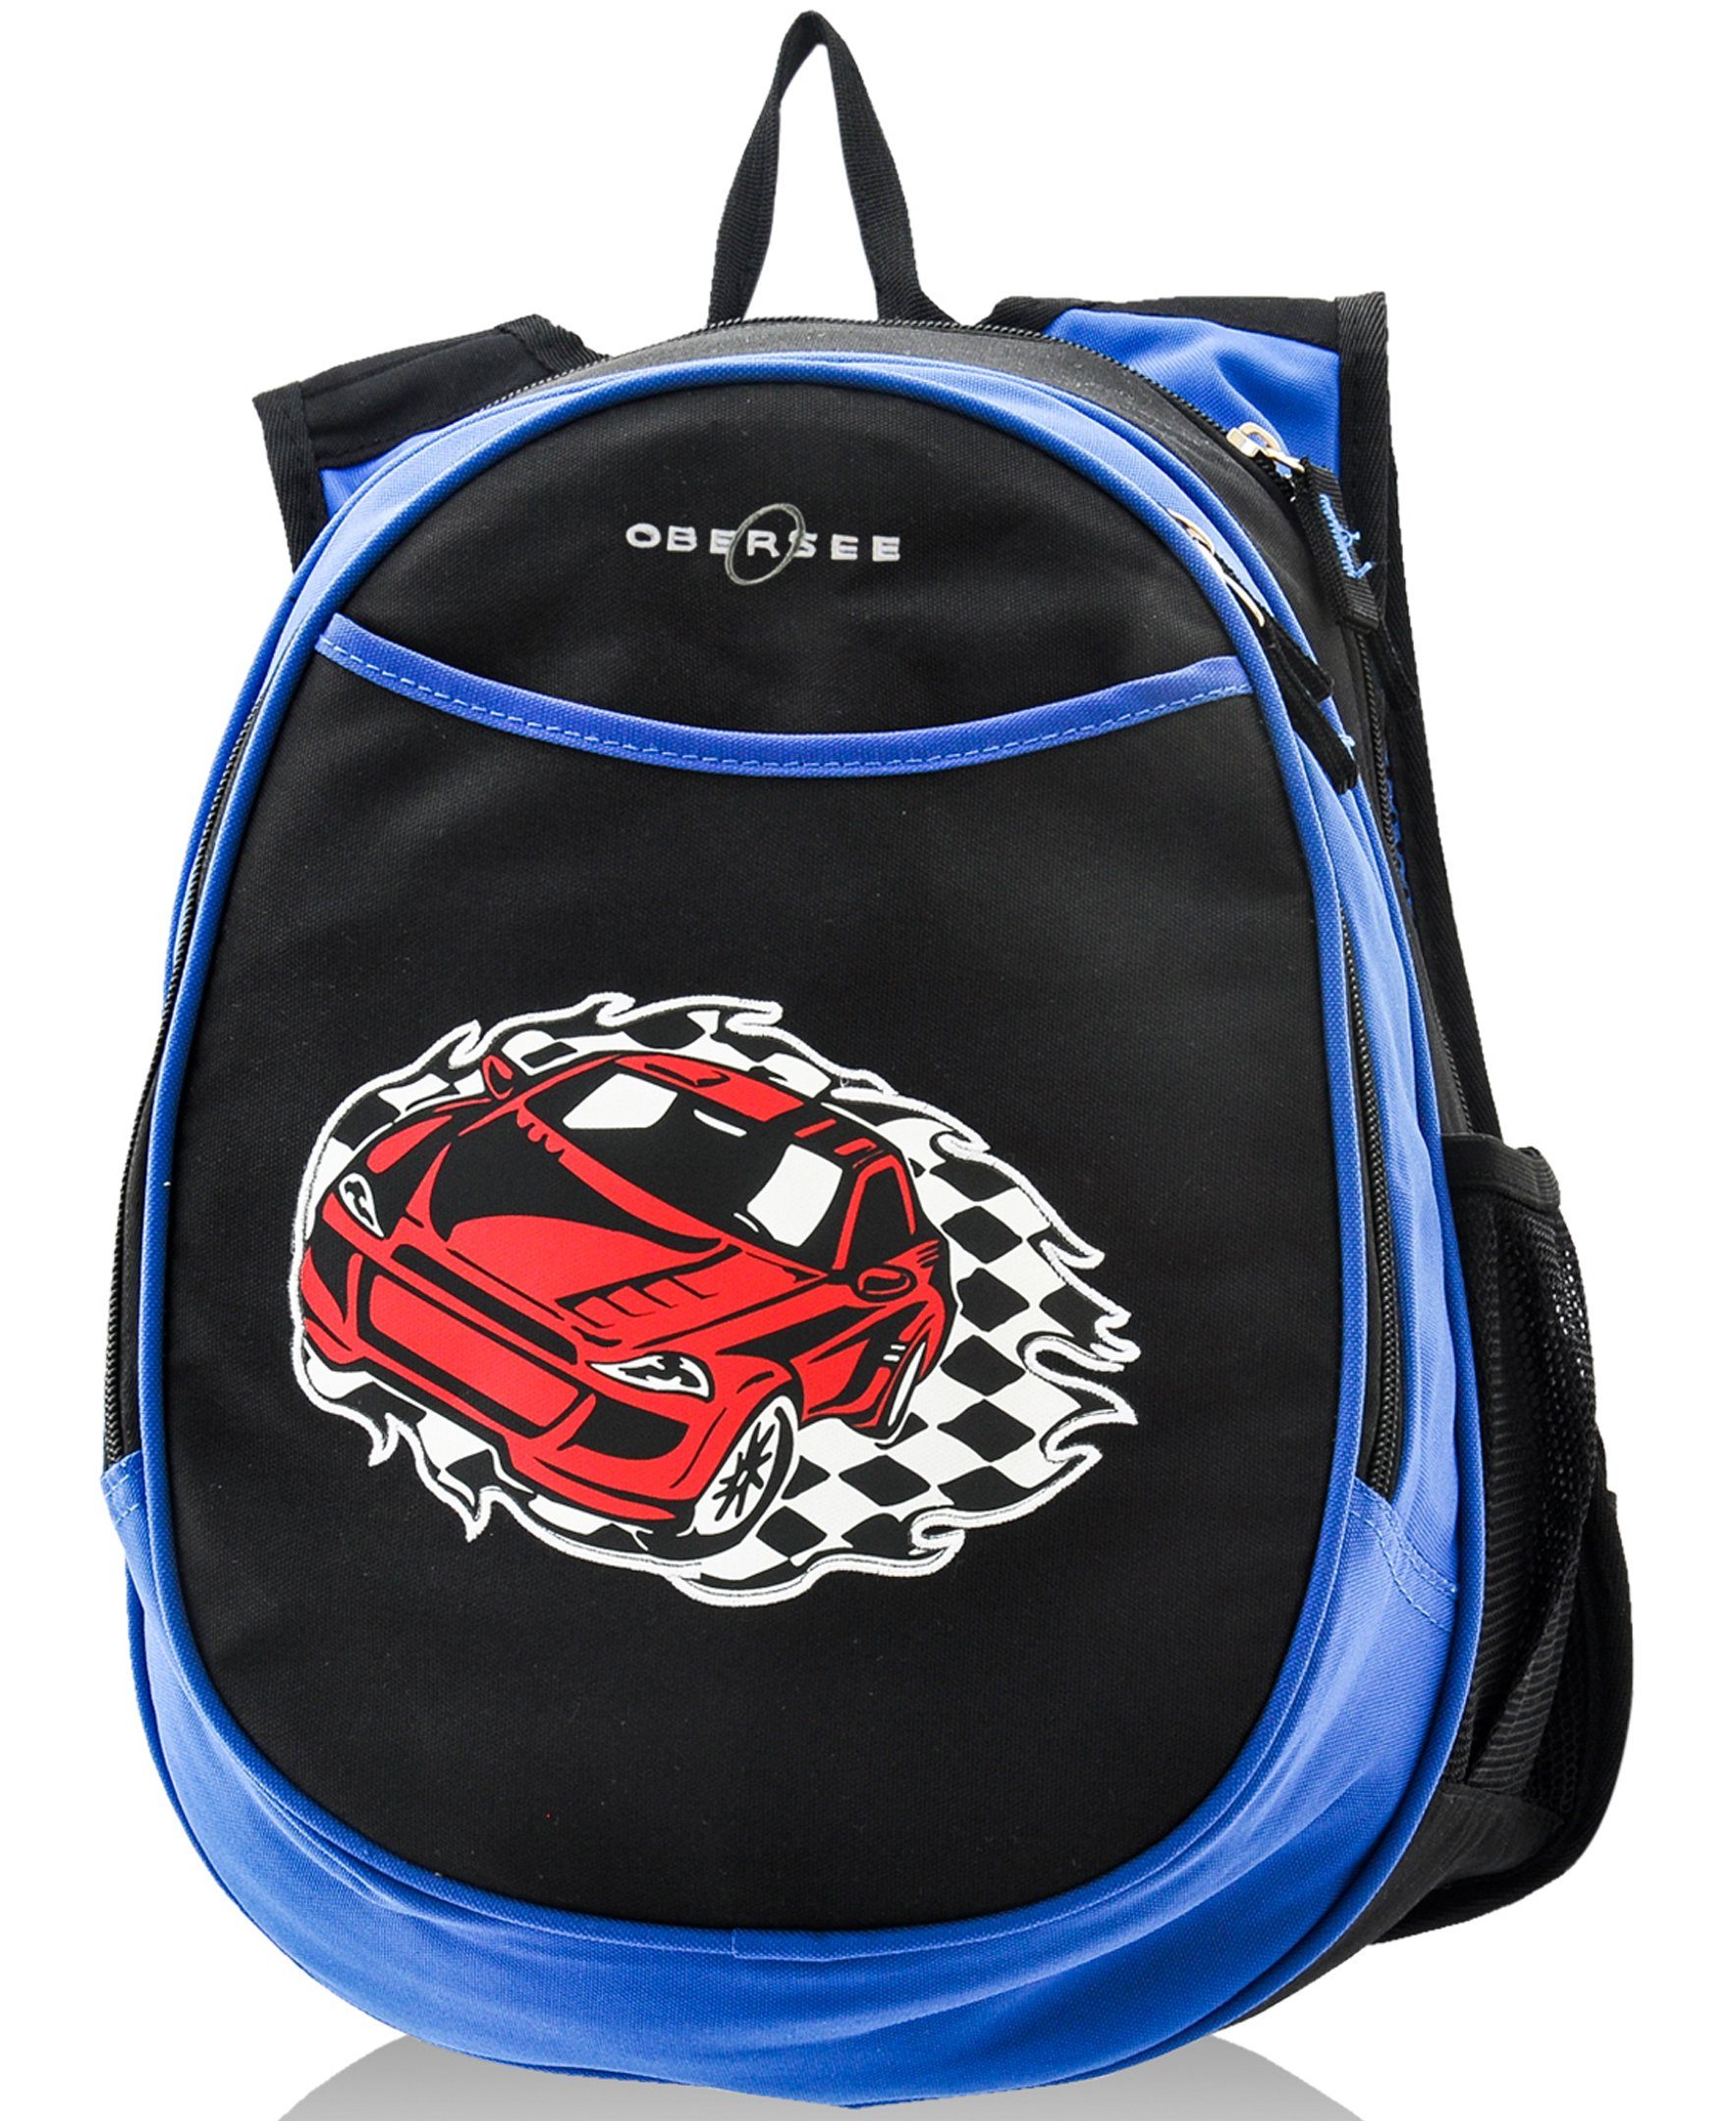 O3KCBP010 Obersee Mini Preschool All-in-One Backpack for Toddlers and Kids with integrated Insulated Cooler | Blue Racecar - image 1 of 5